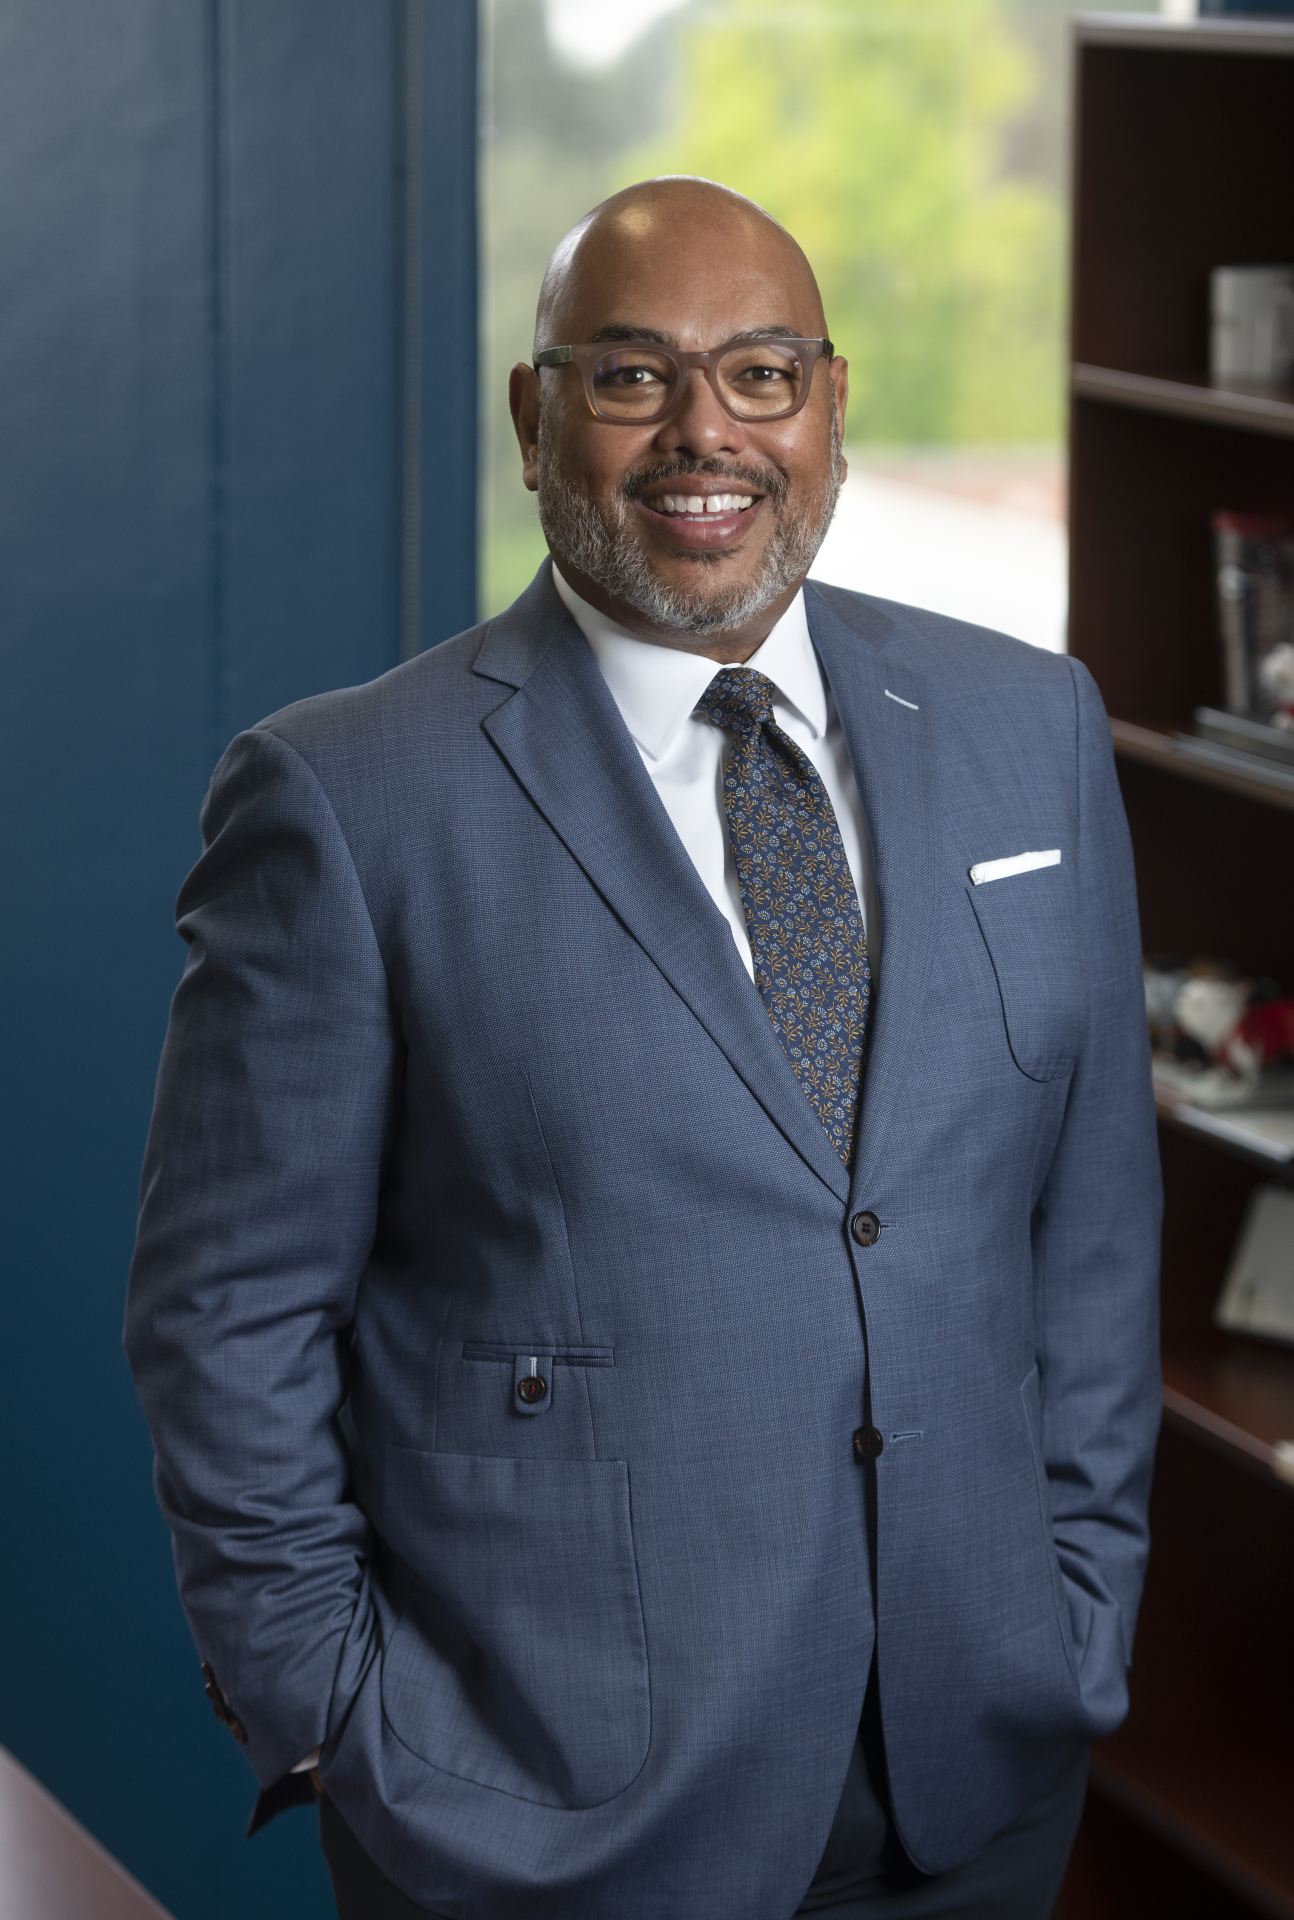 Vice Chancellor of Student Affairs, Dr. Willie Banks, standing and smiling in an office